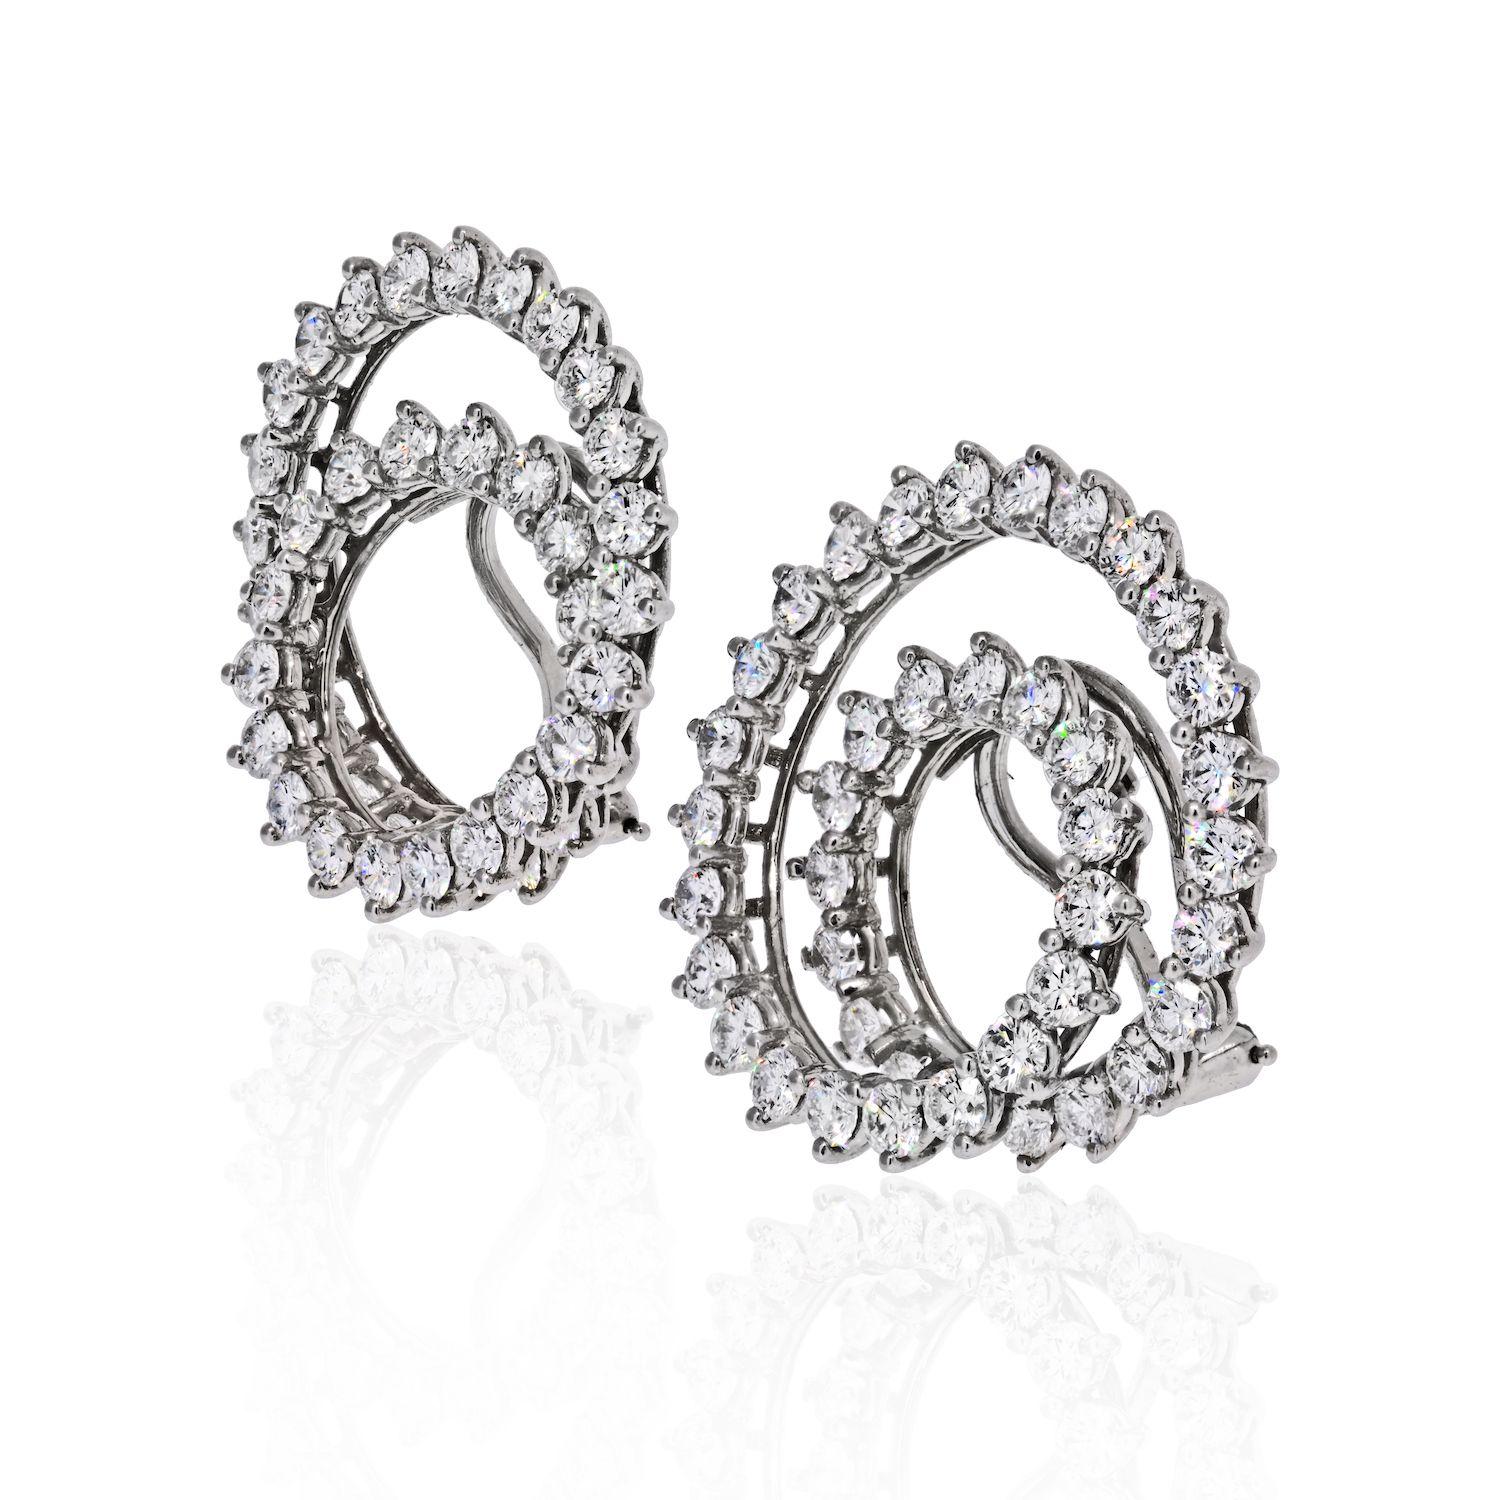 These sparkling Tiffany clip-on earrings feature an iconic swirl design crafted in platinum and set with 82 brilliant-cut round diamonds of an estimated 6.0 carats. Clip-on closure. 20mm wide.
